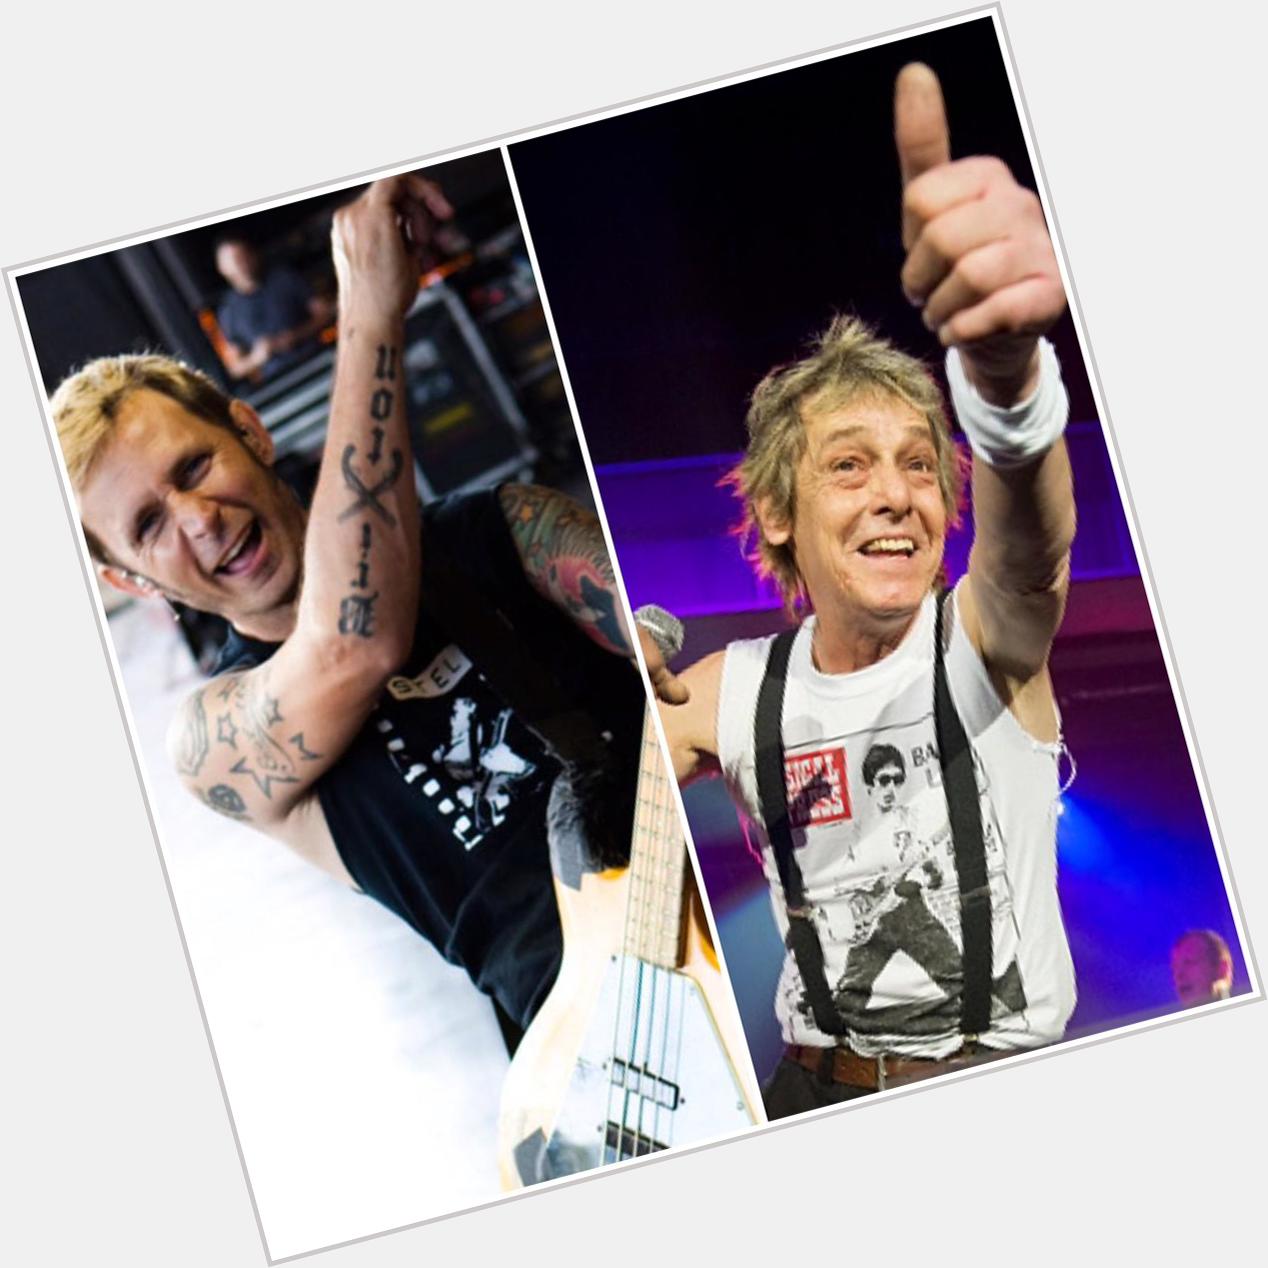 Happy Birthday to two of our bad-ass brothers in rock: Mike Dirnt and Barrie Masters!!  